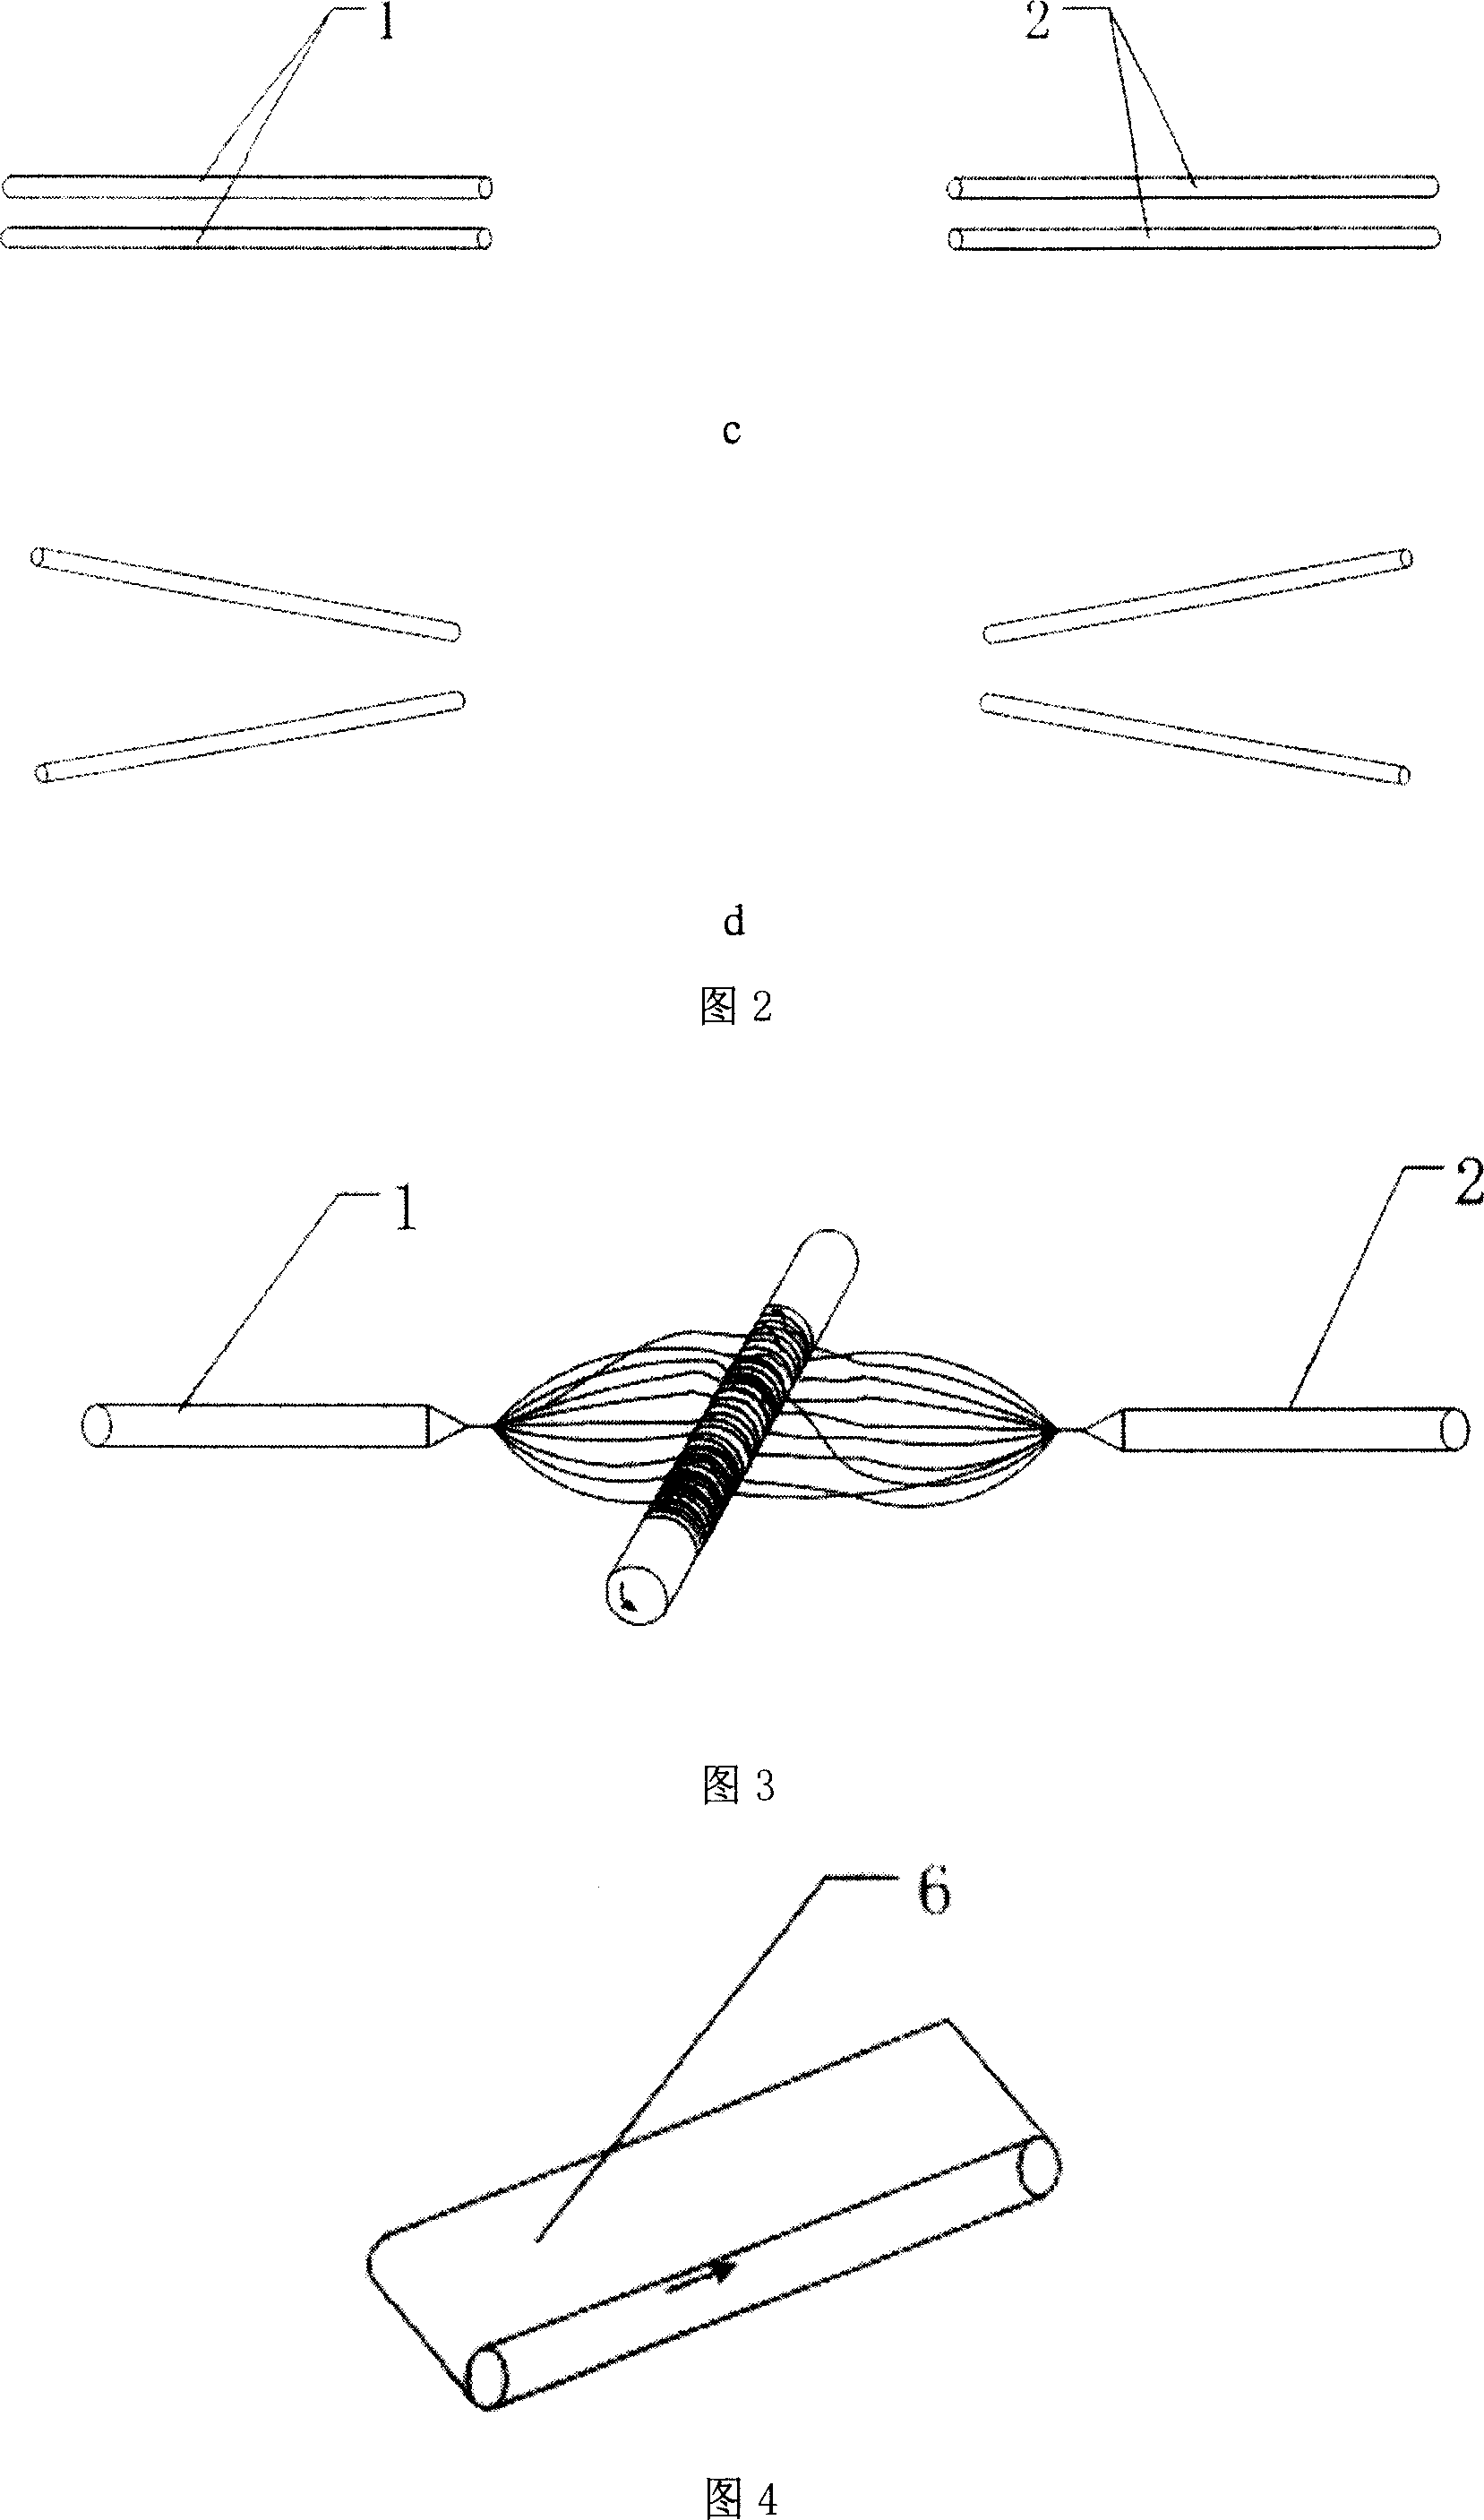 Electric device and method for spinning generation and collection